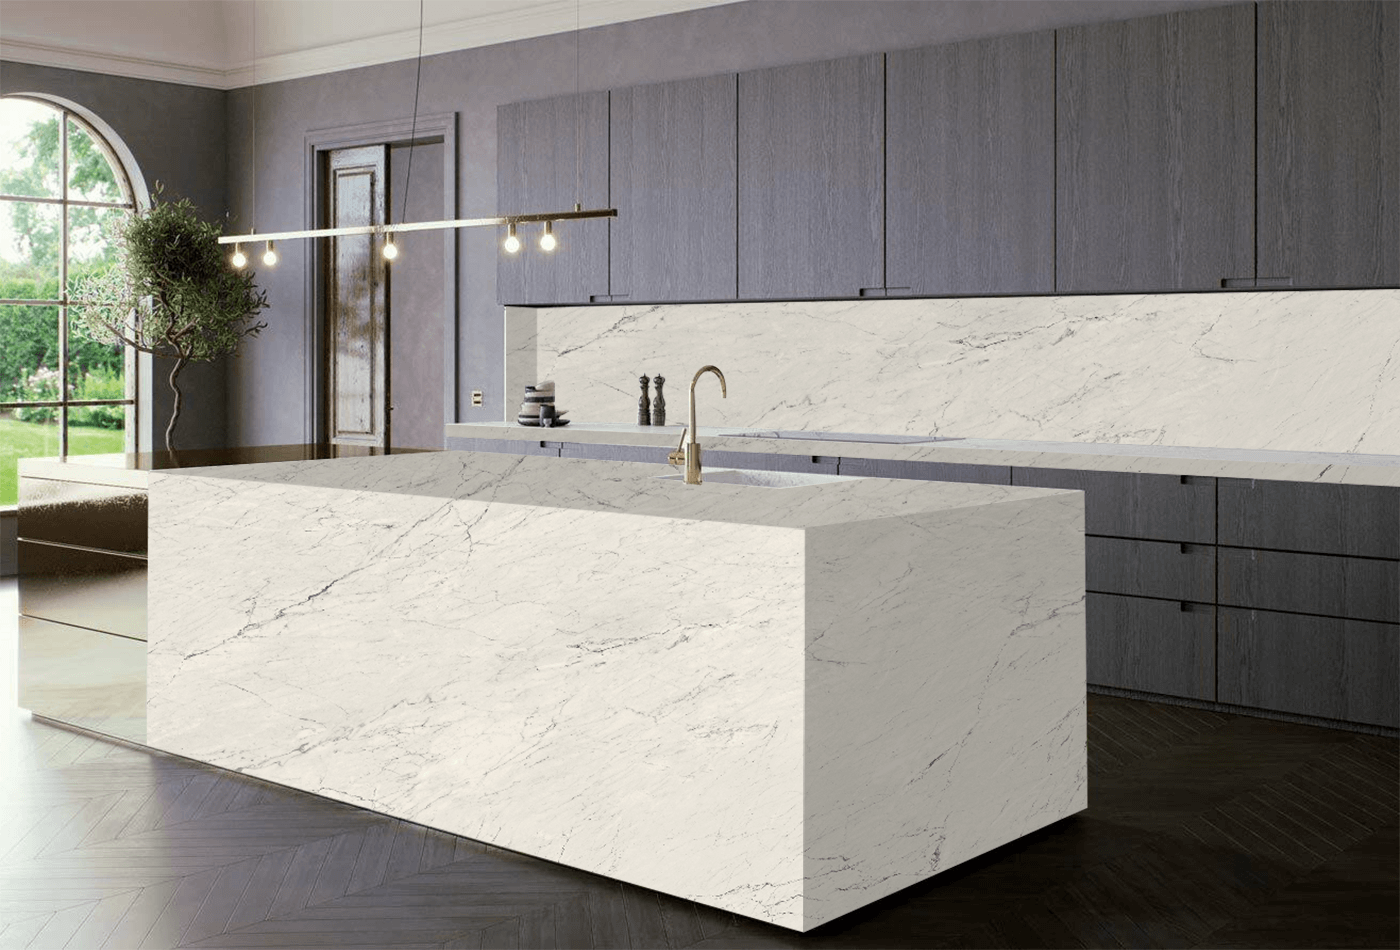 Why Do You Want to Choose Supernatural Porcelain Worktops